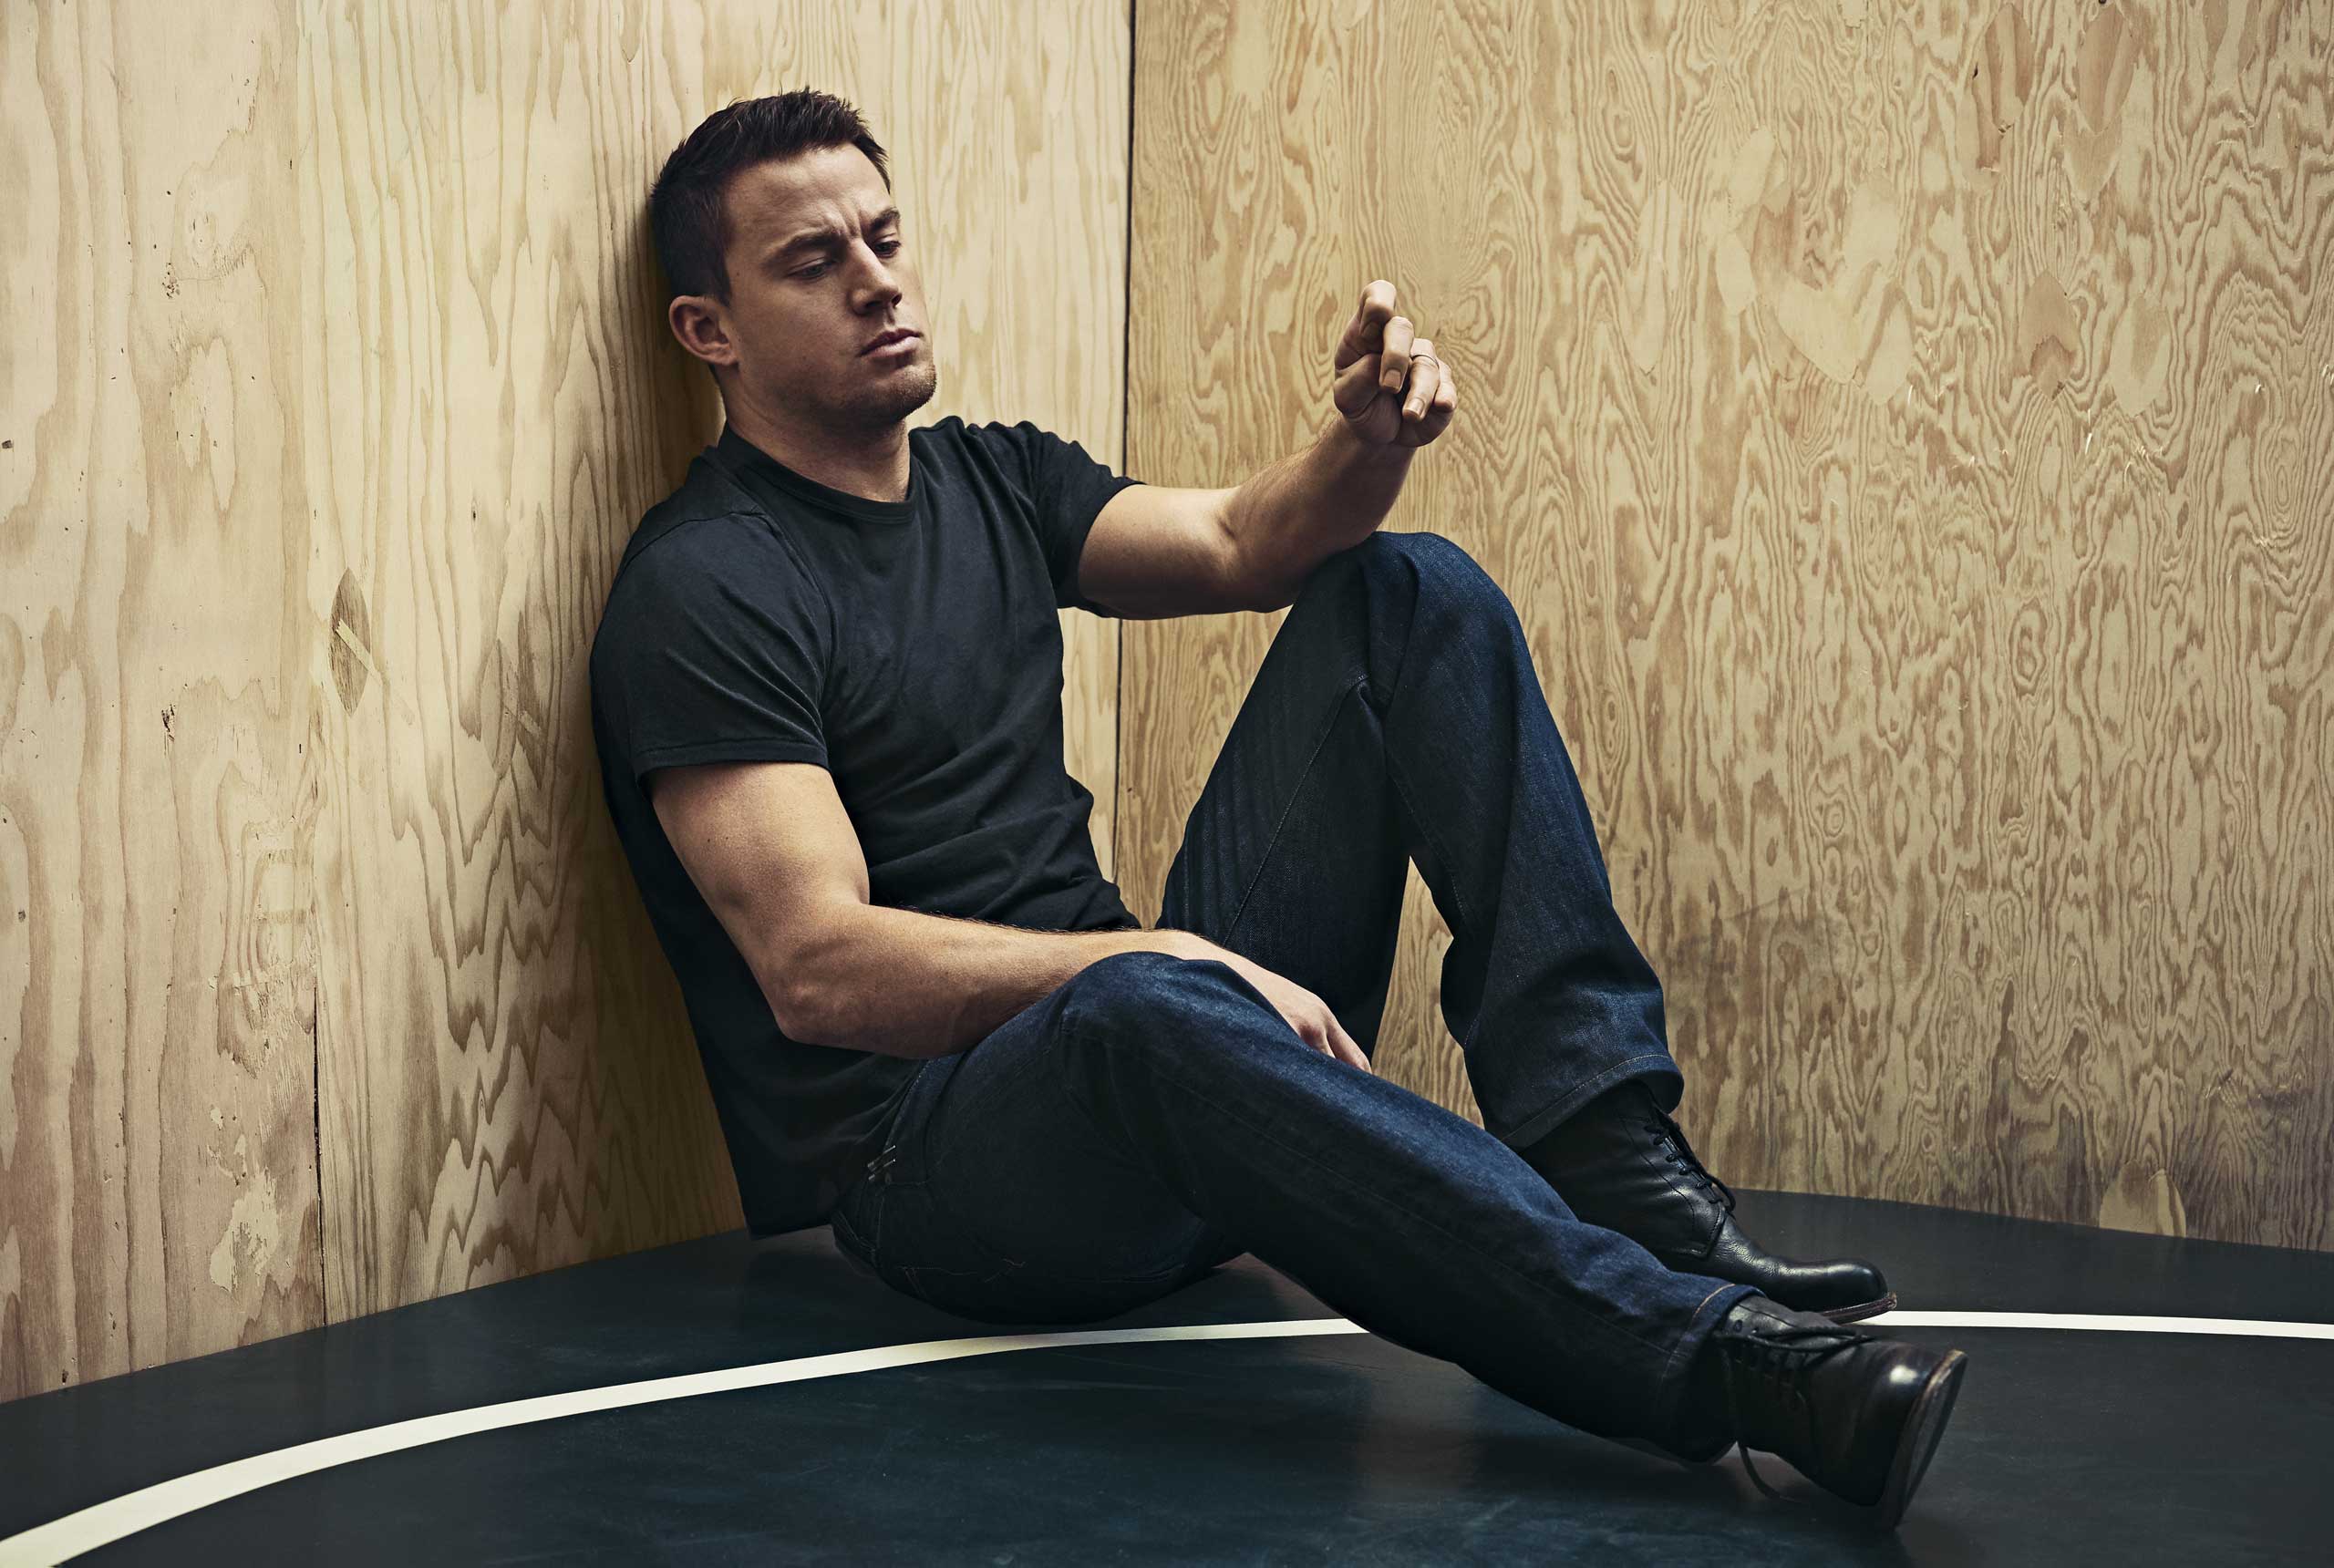 Channing Tatum. From  Body of Work.  November 24, 2014 issue.